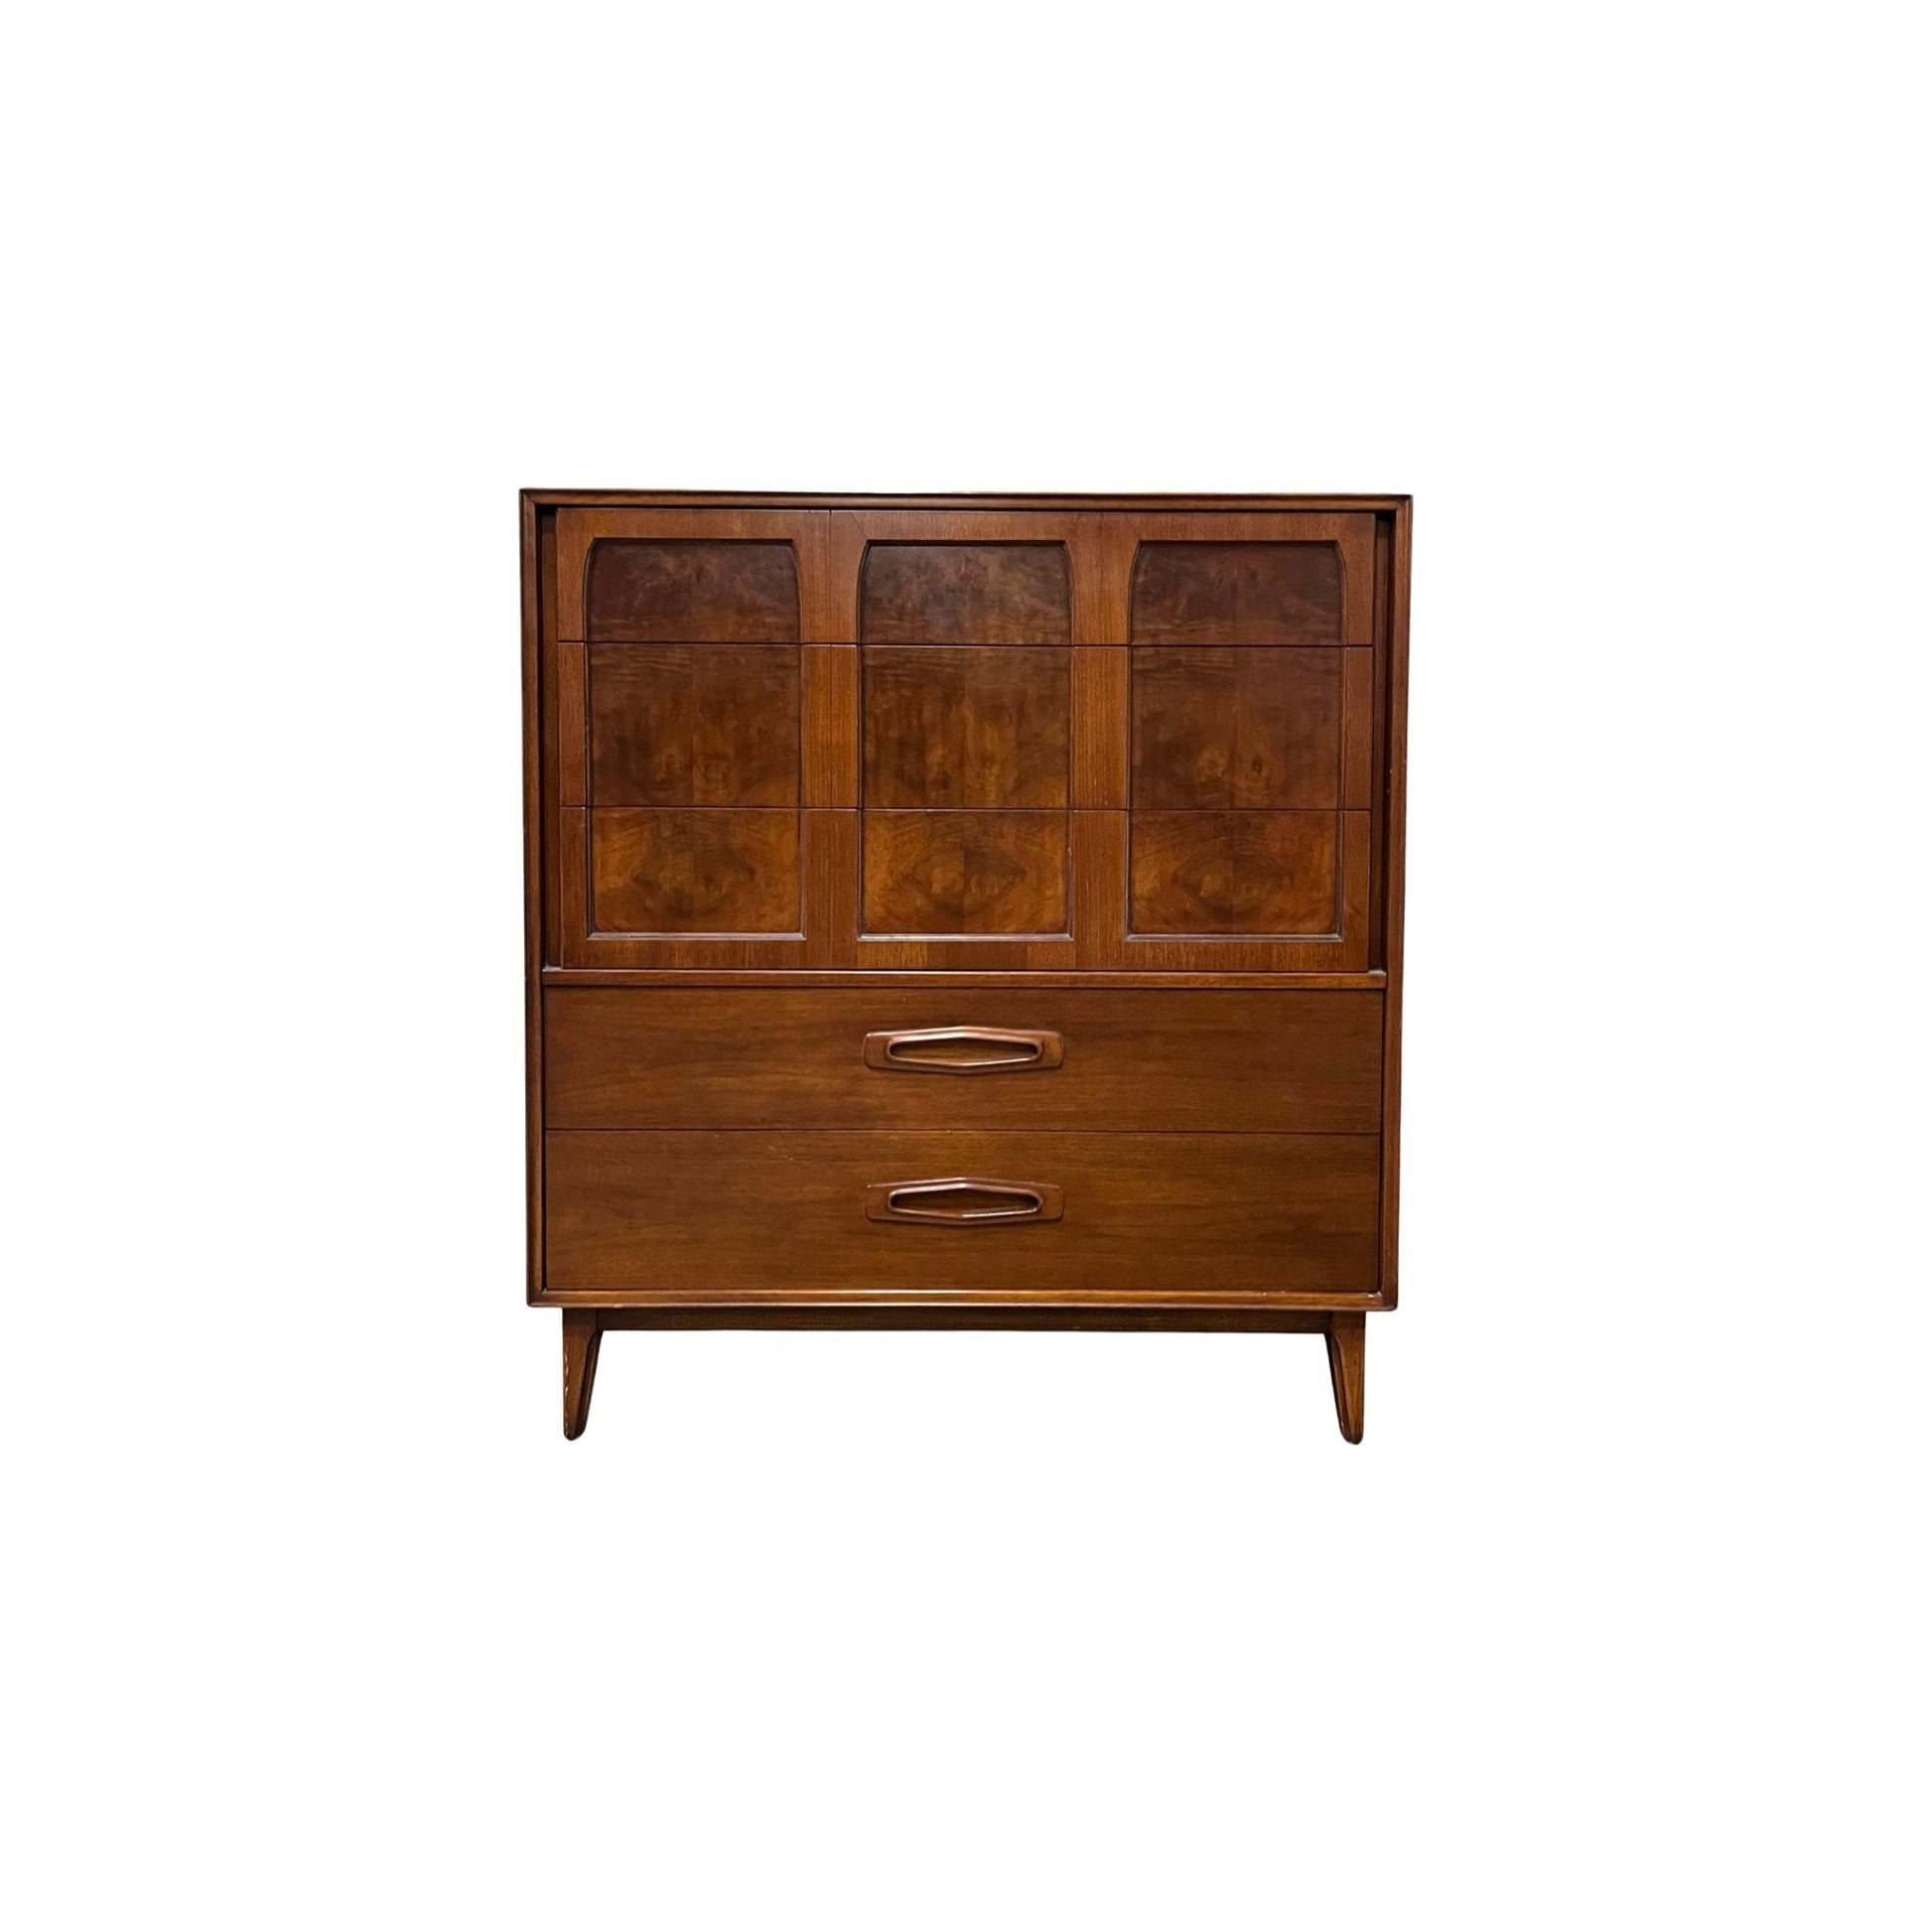 Red Lion Furniture Co. Highboy Dresser - Front View